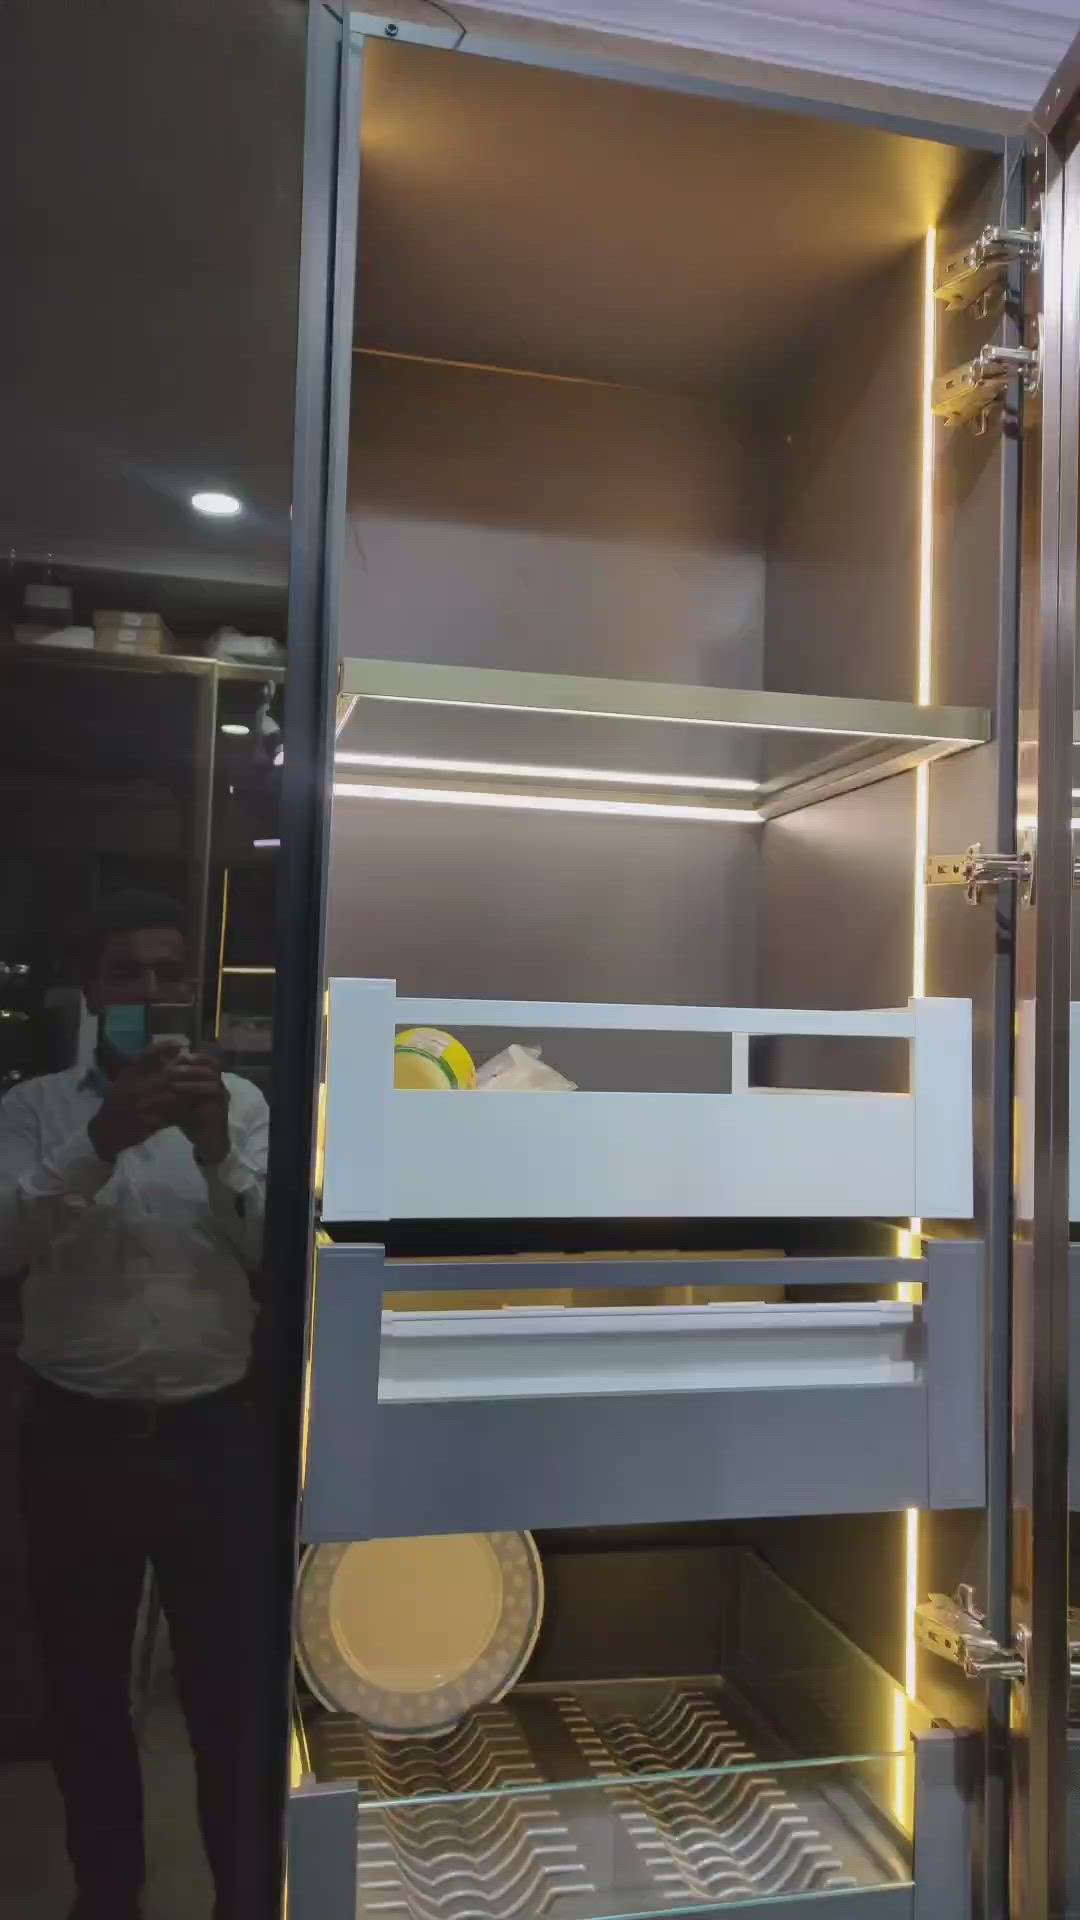 modular
Residential Modular Kitchen finishing work complete project video including accessories soft close hardware fittins
location - East of Kailash Near Sapna Cinema

WE PROMISE WE ENSURE WE DELIVER
Residential-Commercial-Turnkey-Interiors
Contact- for New Queries 
9810753118, 7861053118
stardominteriors786@yahoo.com

#Kitchenrenovation#kitchenhardwaresuppliers#
#commercialkitchen#availableforkitchenallfittings#